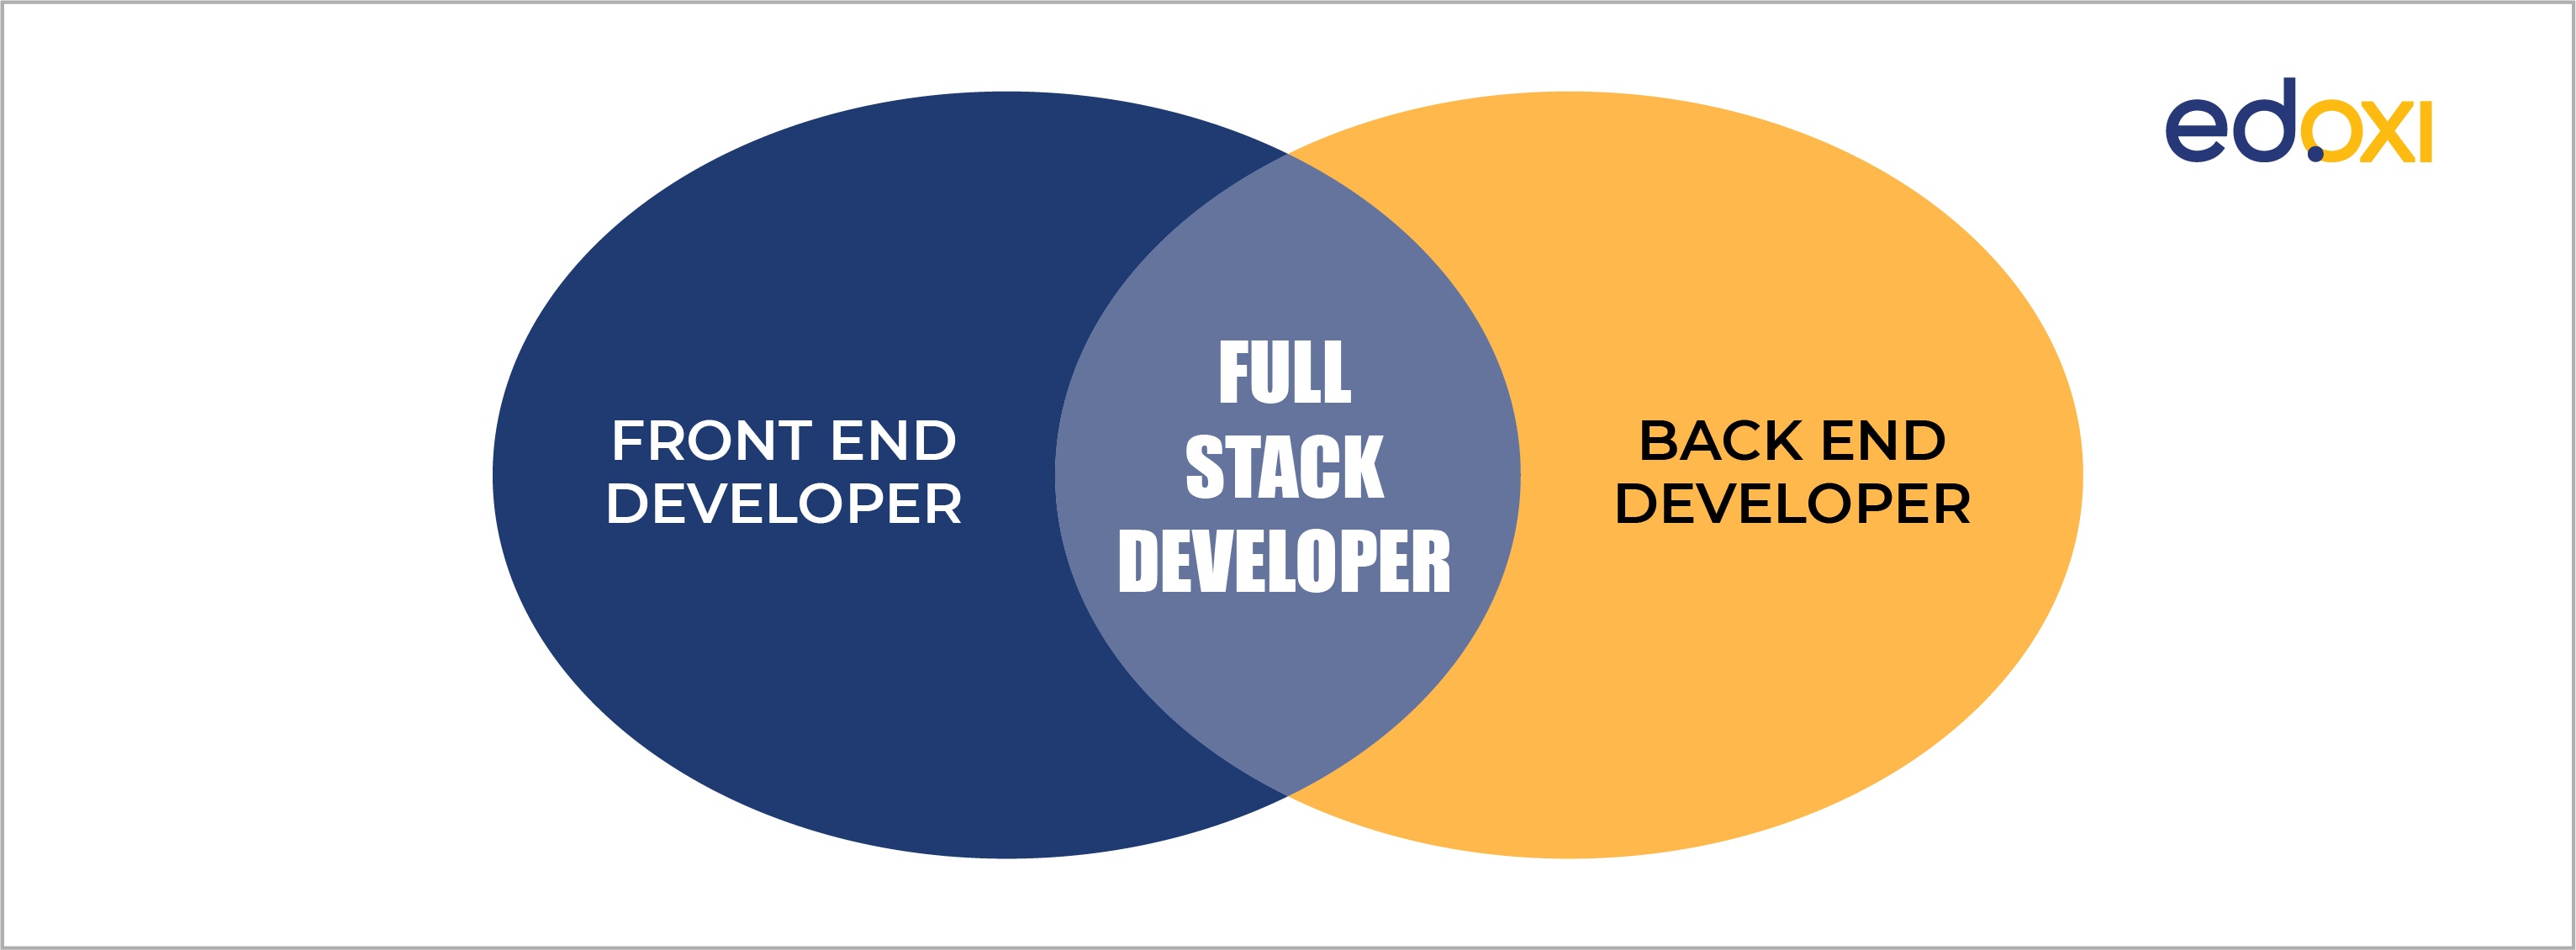 The picture depicts two sides of what makes a full-stack developer